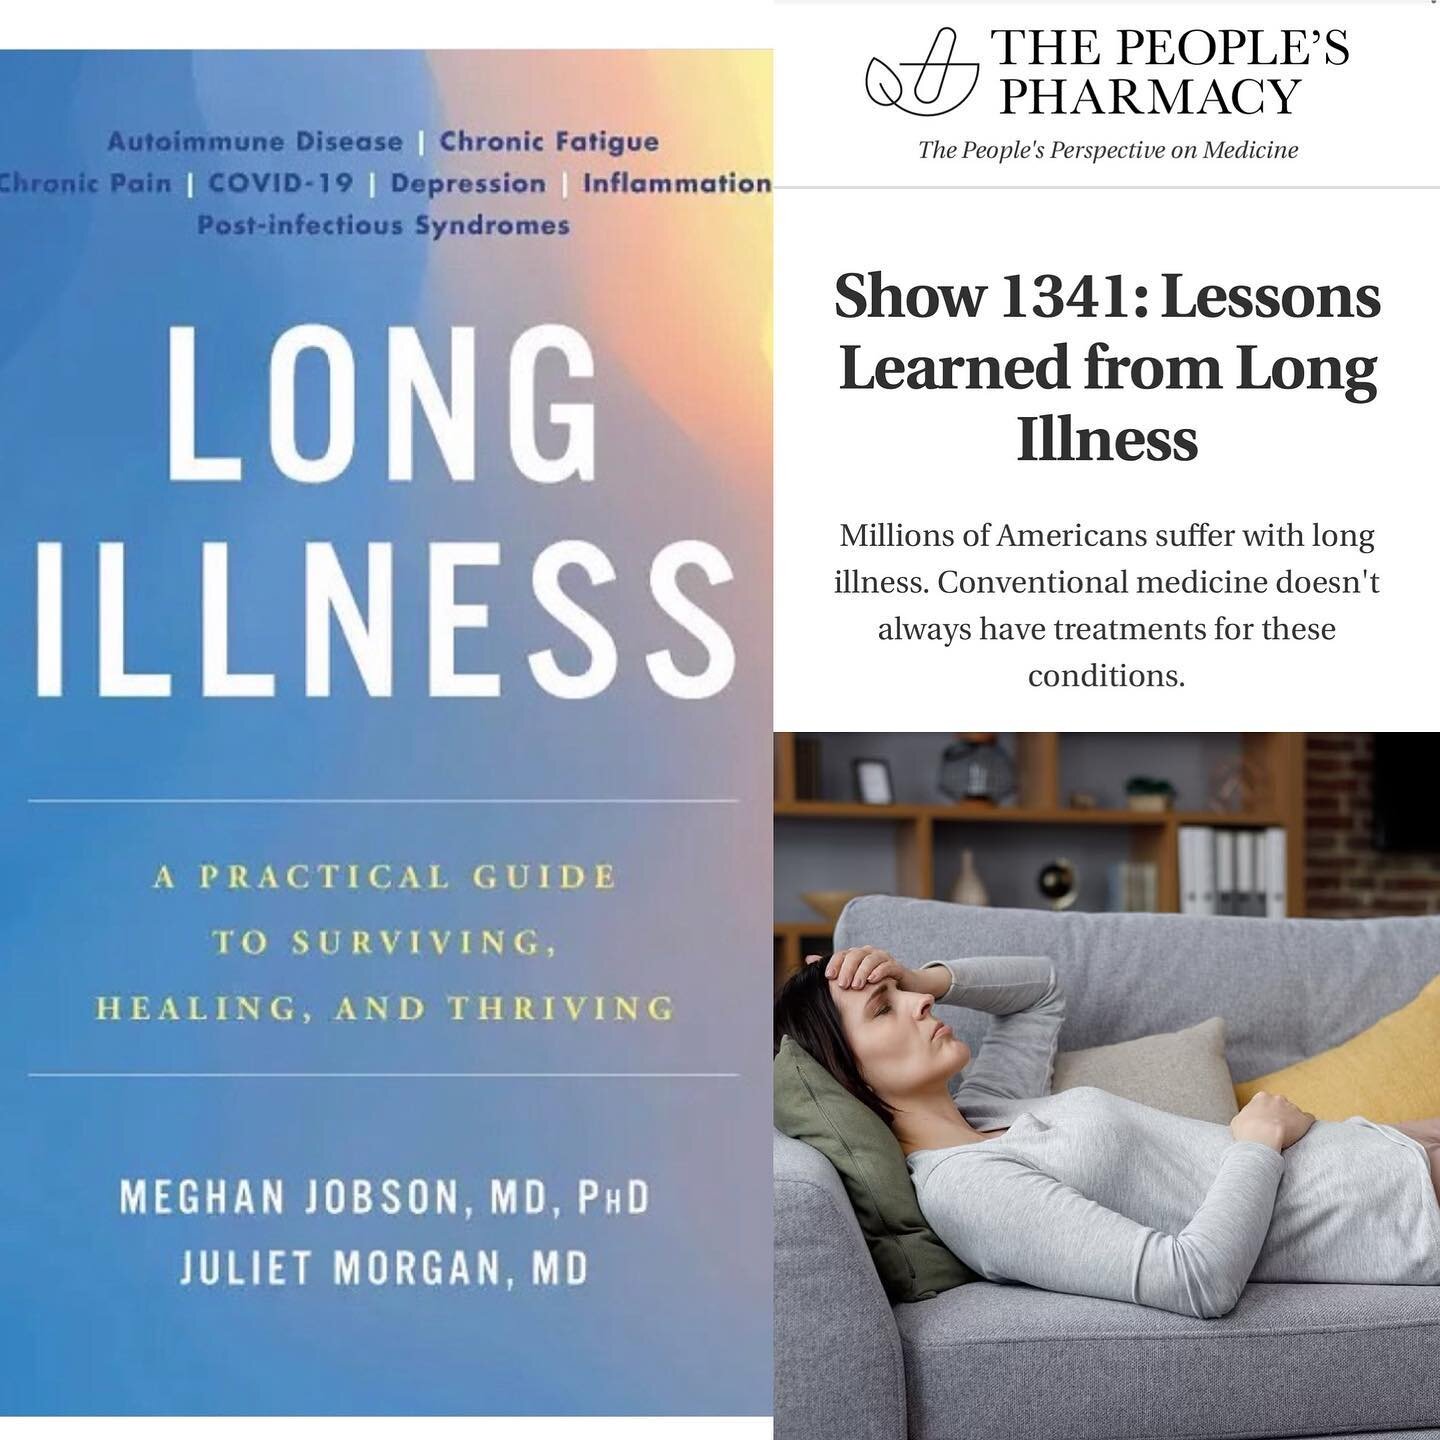 Many thanks to Joe and Terry Graedon for having me on the The People&rsquo;s Pharmacy to talk about our new book, Long Illness. Growing up and living a lot of my life in North Carolina, I've heard their voices on the radio for as long as I can rememb